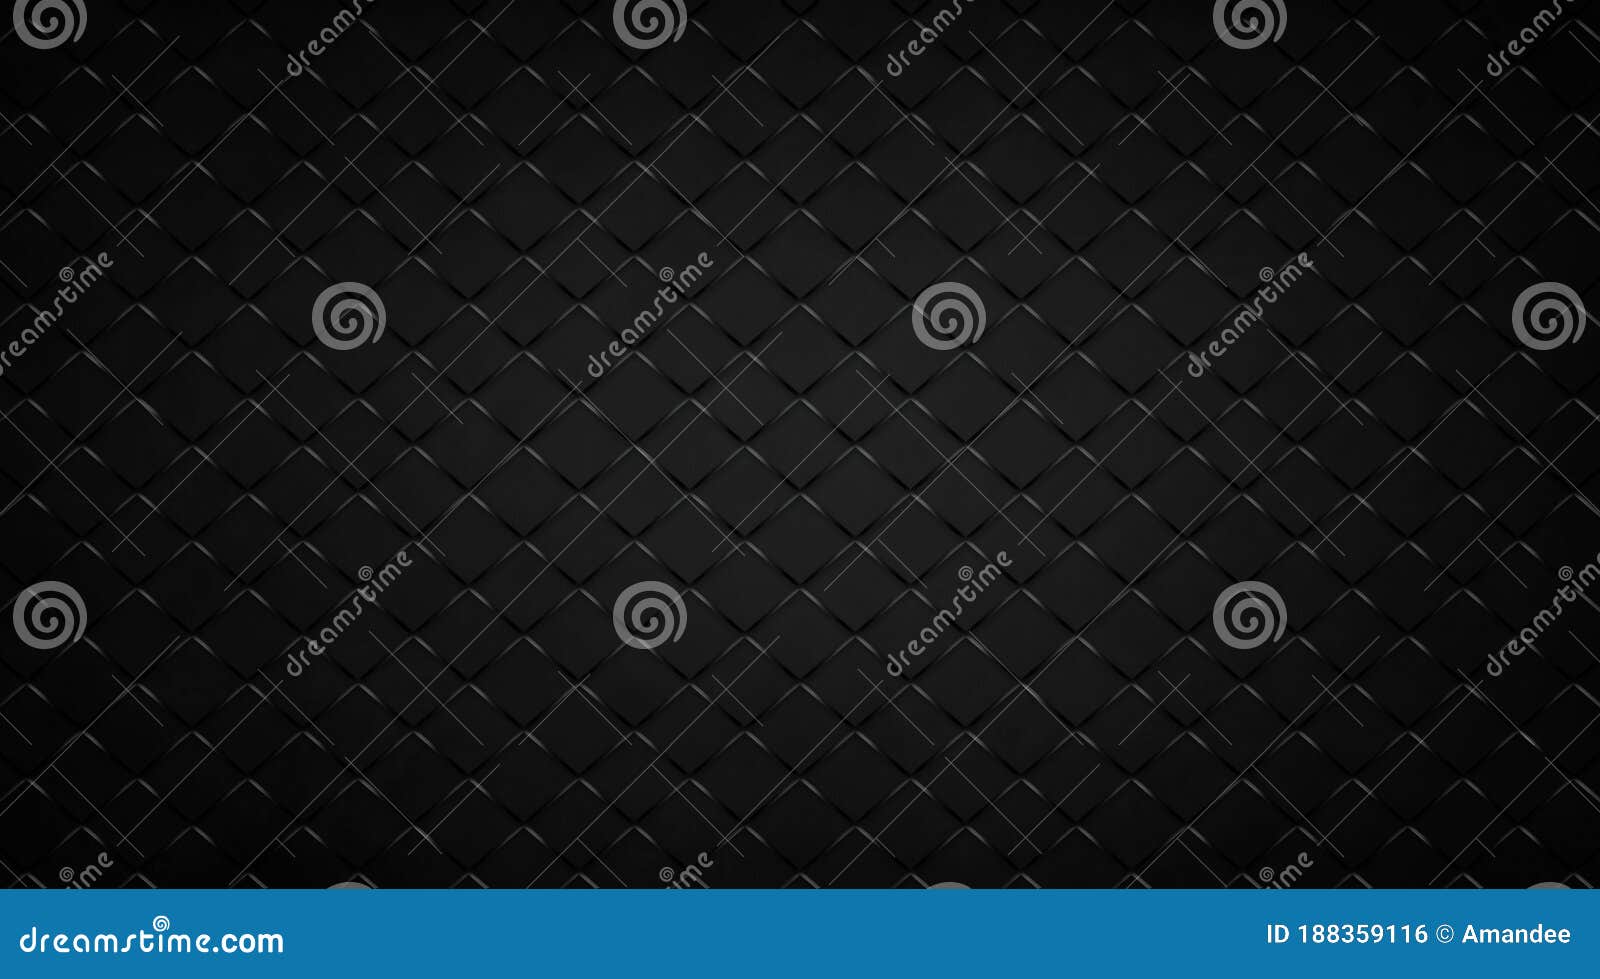 abstract black background with diamond block grid pattern, elegant metal texture in dark techo  with lines